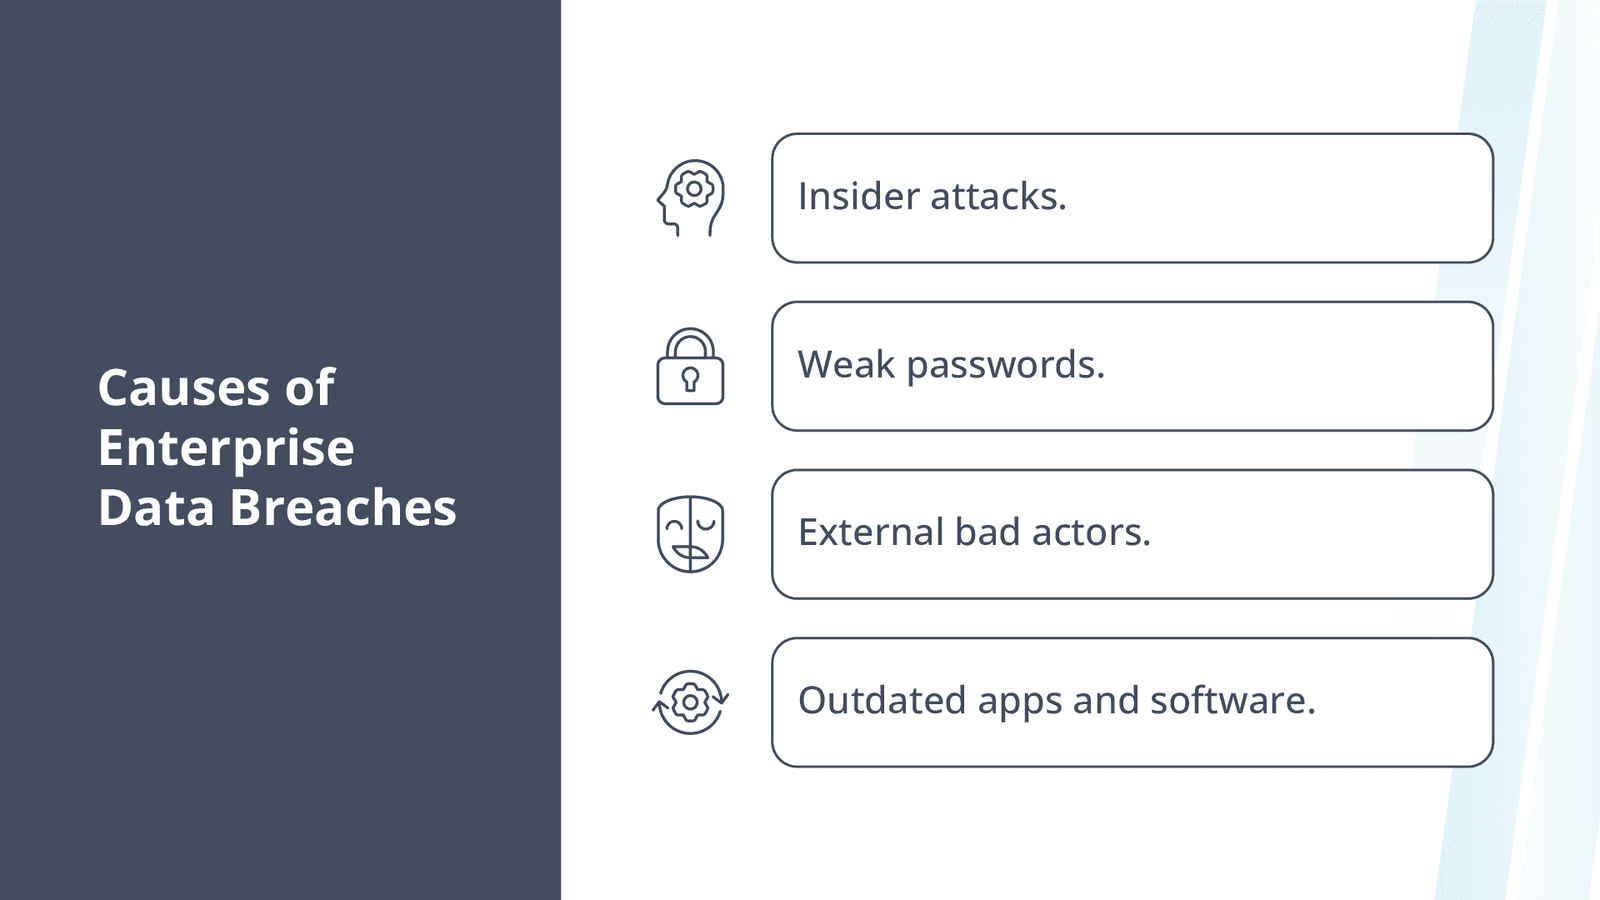 Learn how to prevent data breaches by identifying common causes. 